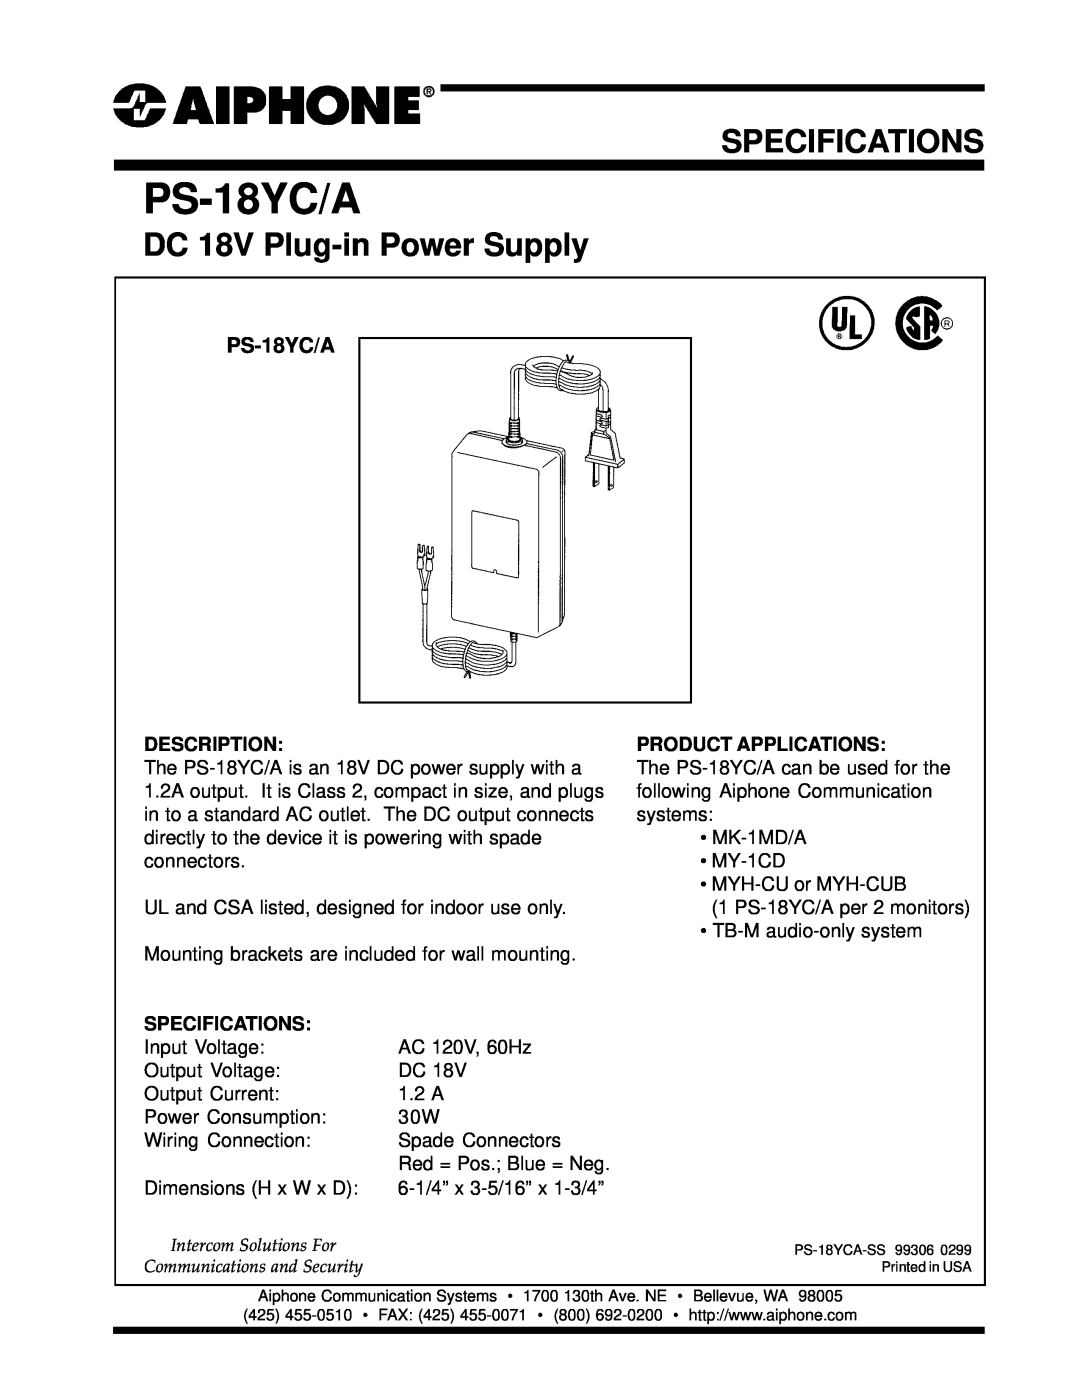 Aiphone PS-18YC/A specifications Specifications, DC 18V Plug-in Power Supply, Description, Product Applications 